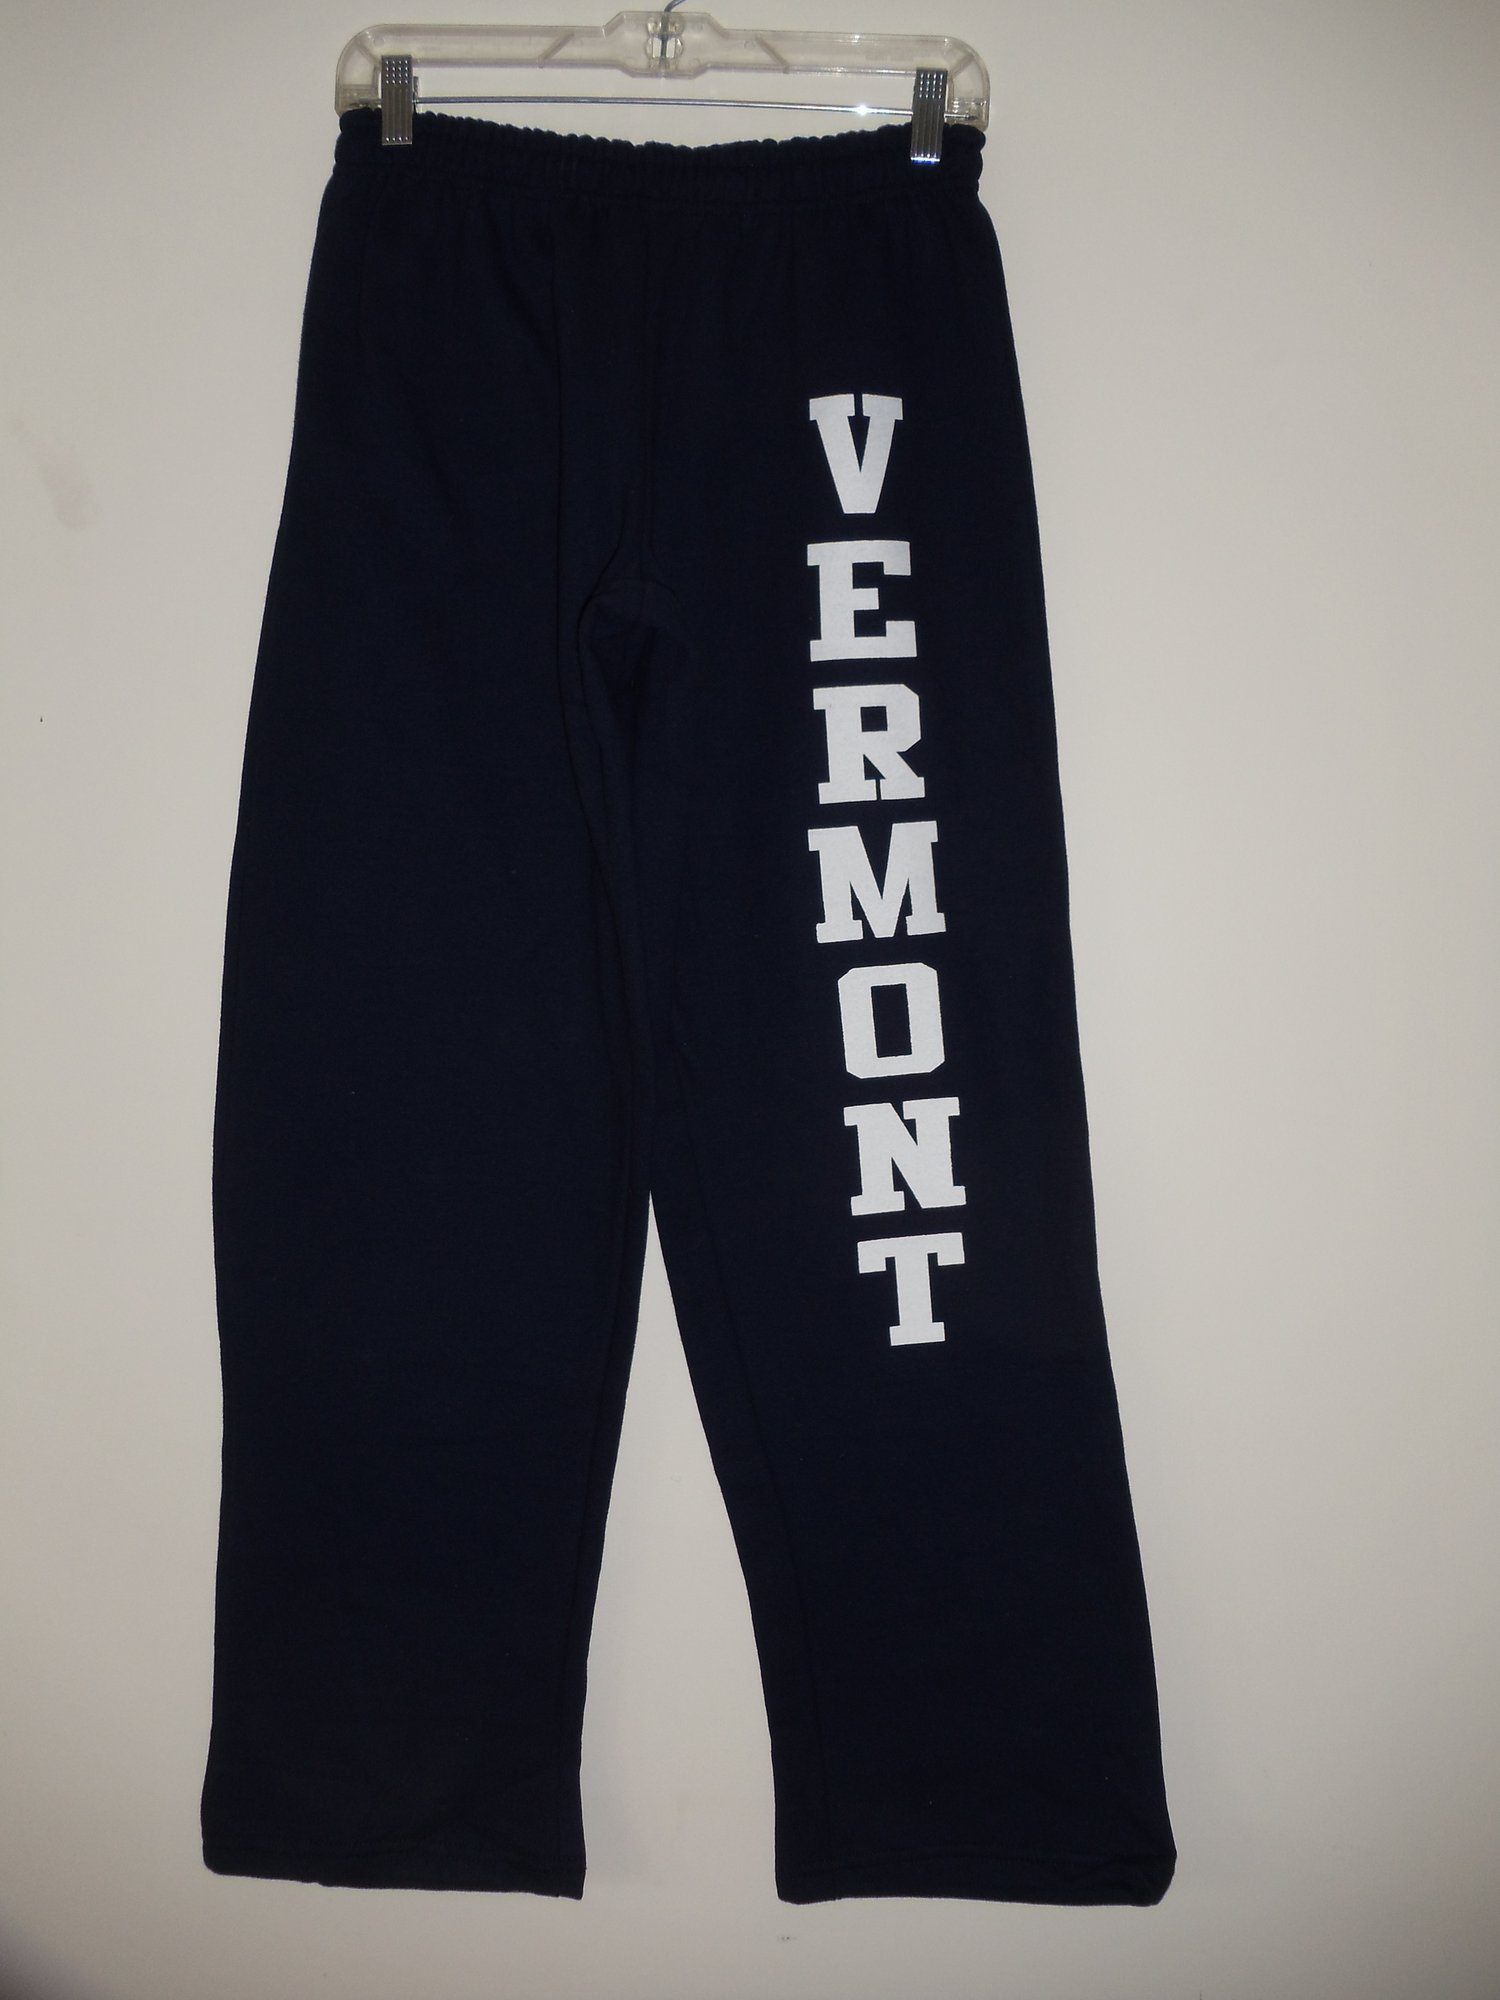 Image of Vermont Sweatpants 8oz - White on Navy Blue - Vermont clothing - 802 clothing - 802 store